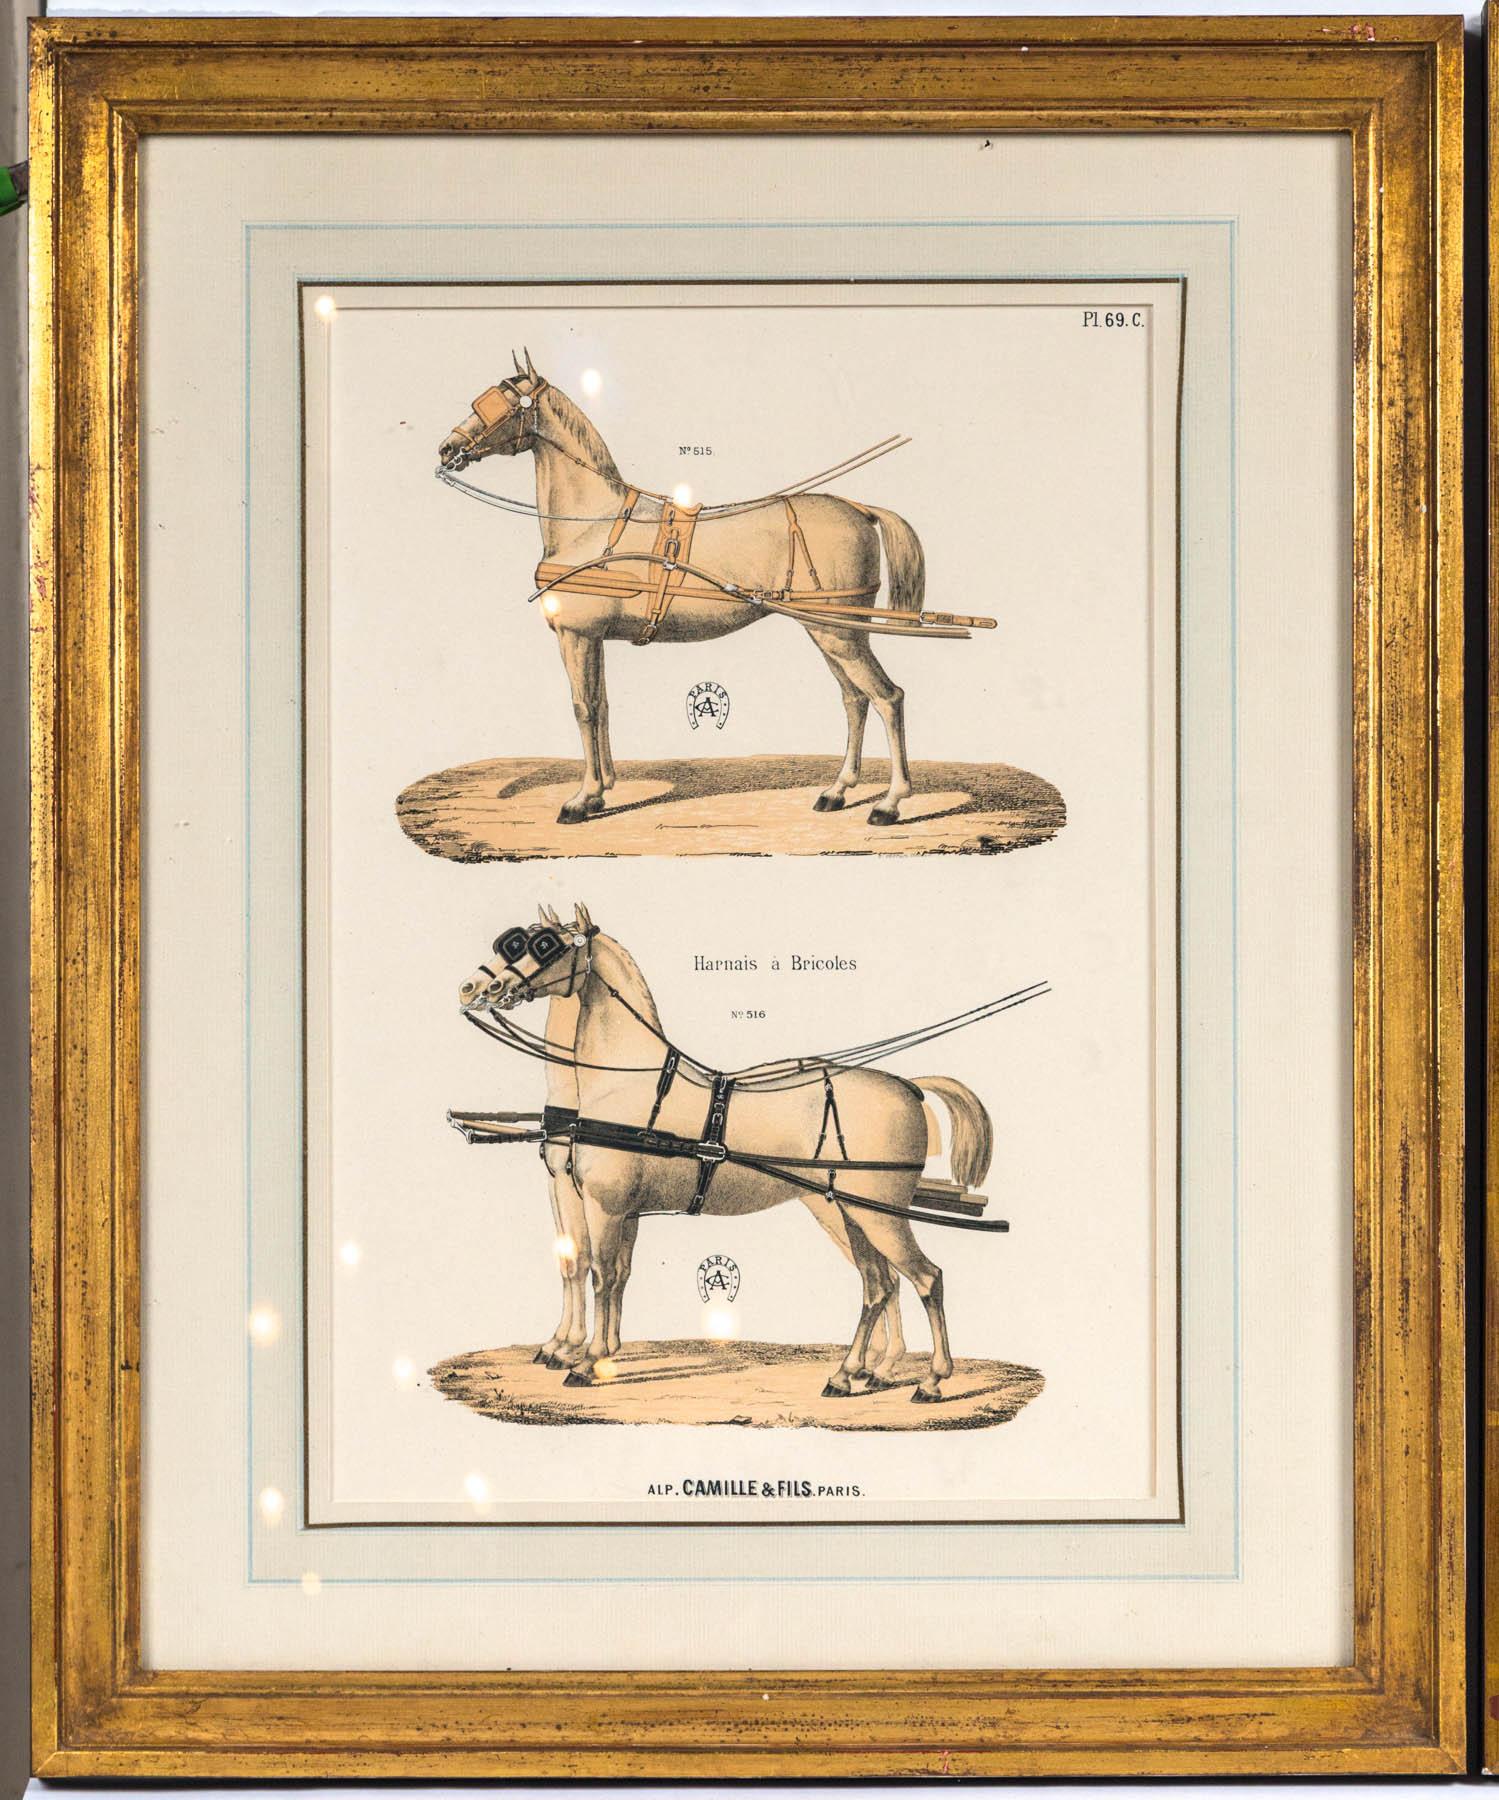 This set is comprised of 5 framed engravings, 4 horizontal and one vertical. They show harnesses, bridles, saddles, leggings, and even saddle bags.
Art work by Ed. Oberlin, 26 rue des Fosses, St. Jacques, Paris
Engraving by J. Charles, 9 Rue de